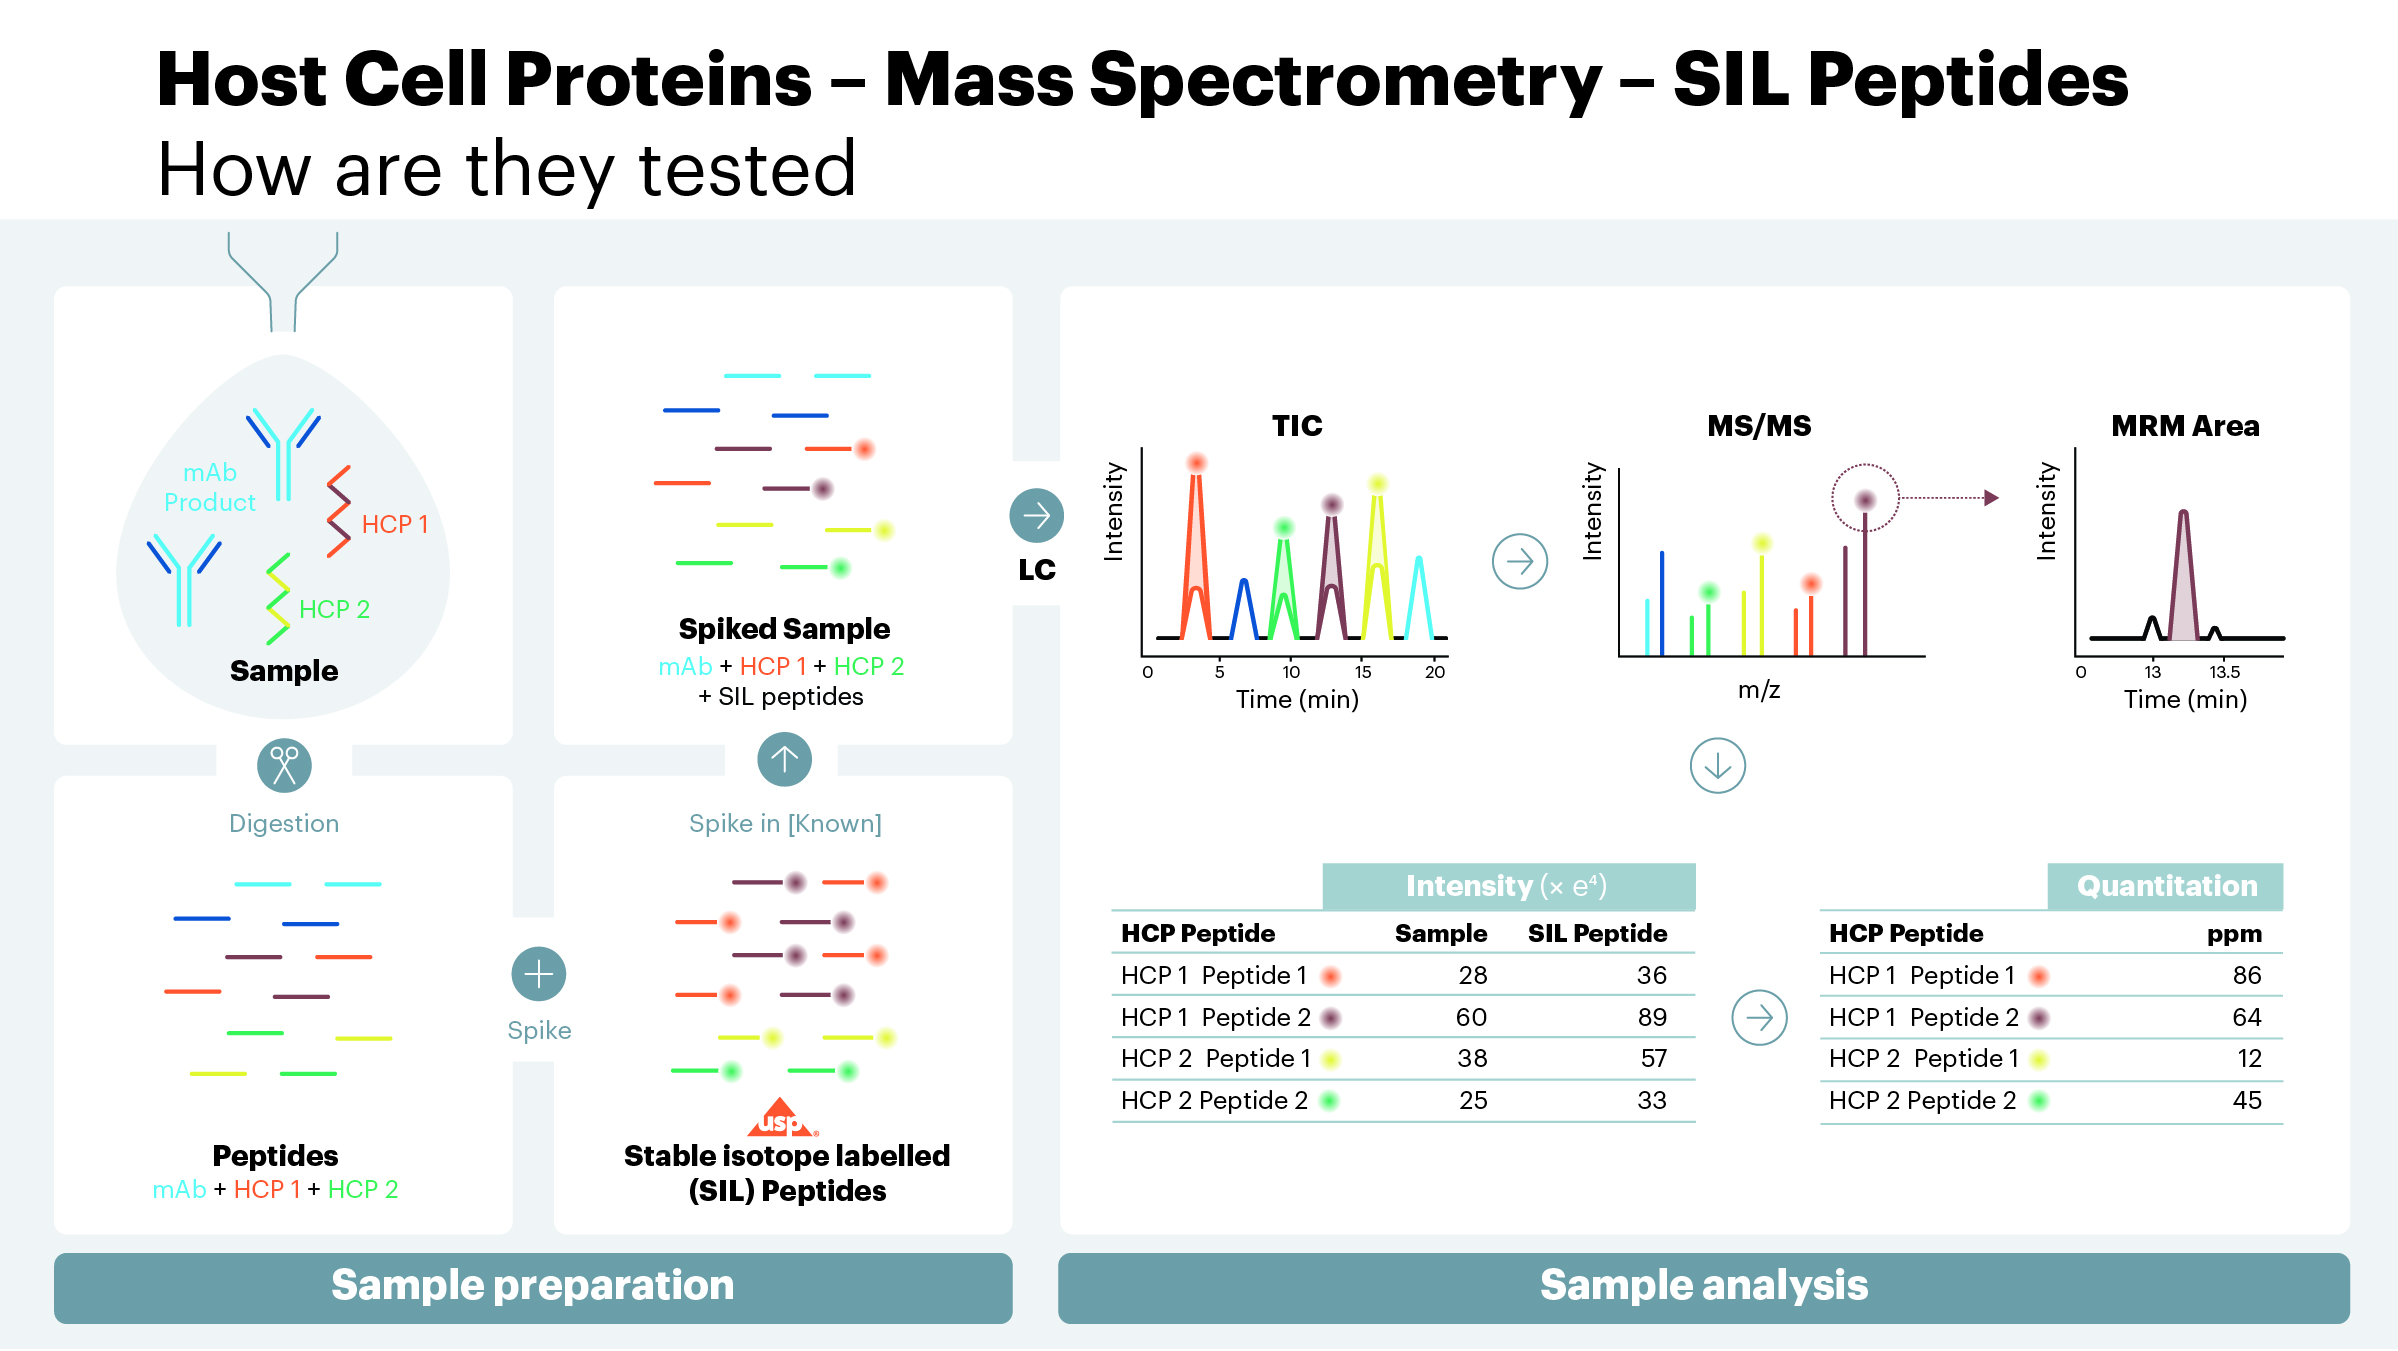 Host Cell Proteins - Mass Spectrometry - SIL Peptides